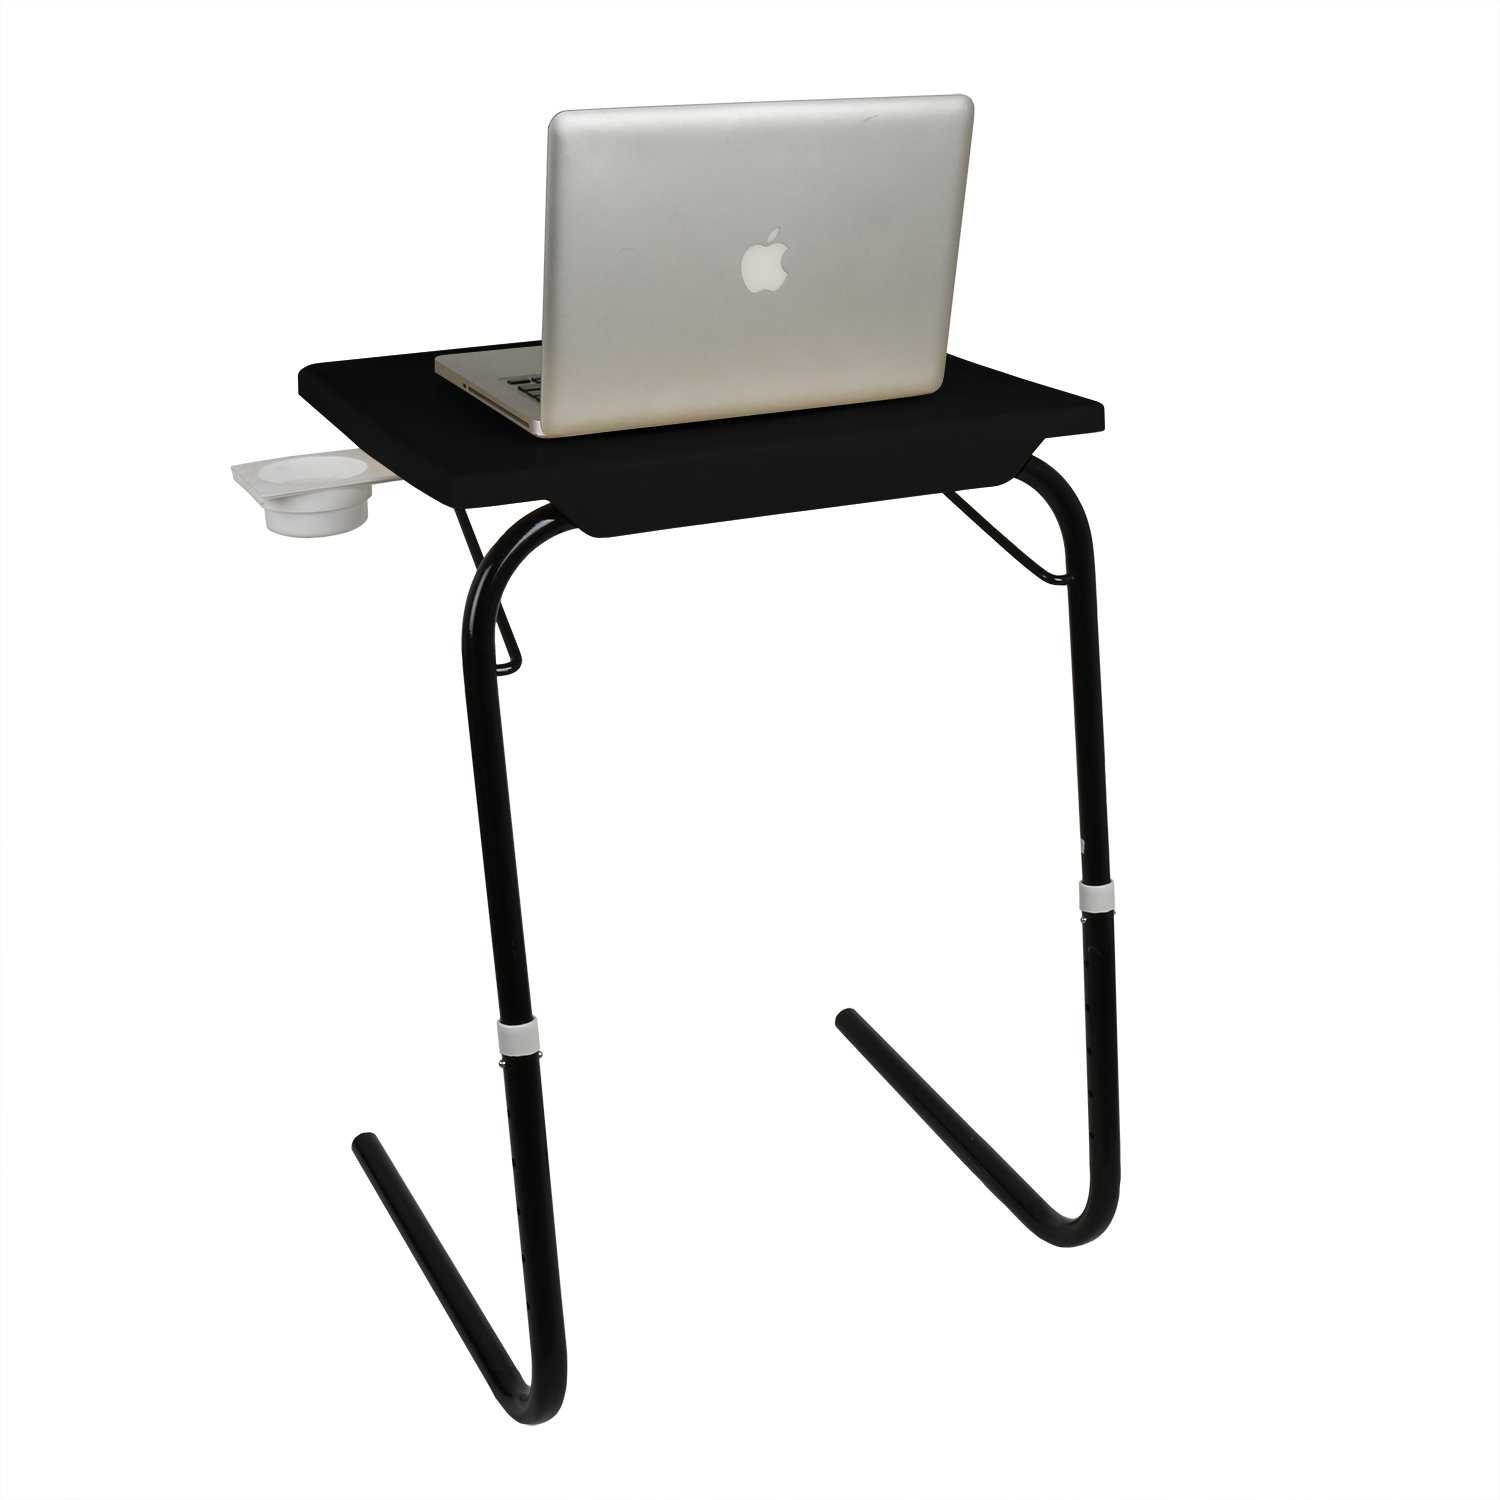  Table mate with Black finishing elegant look | Wudore